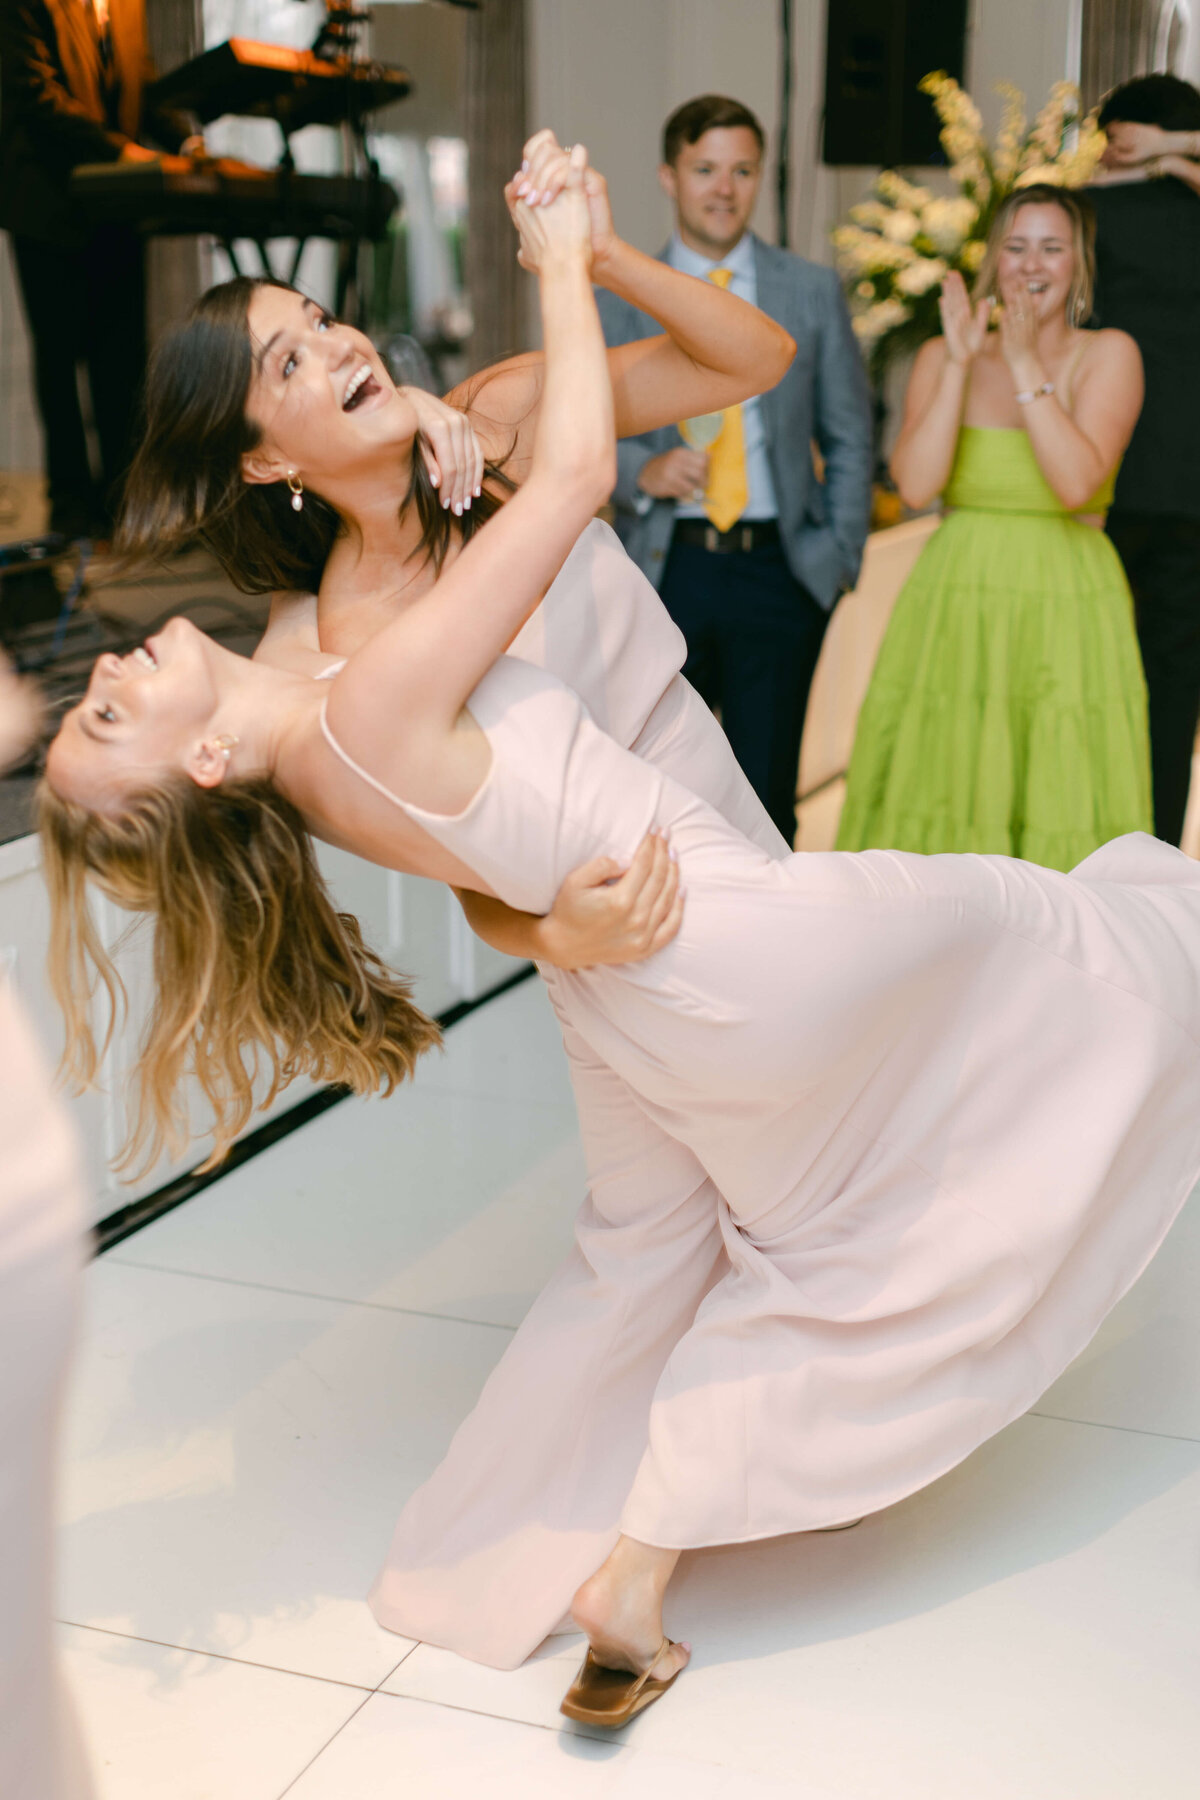 Two wedding guests dance happily.